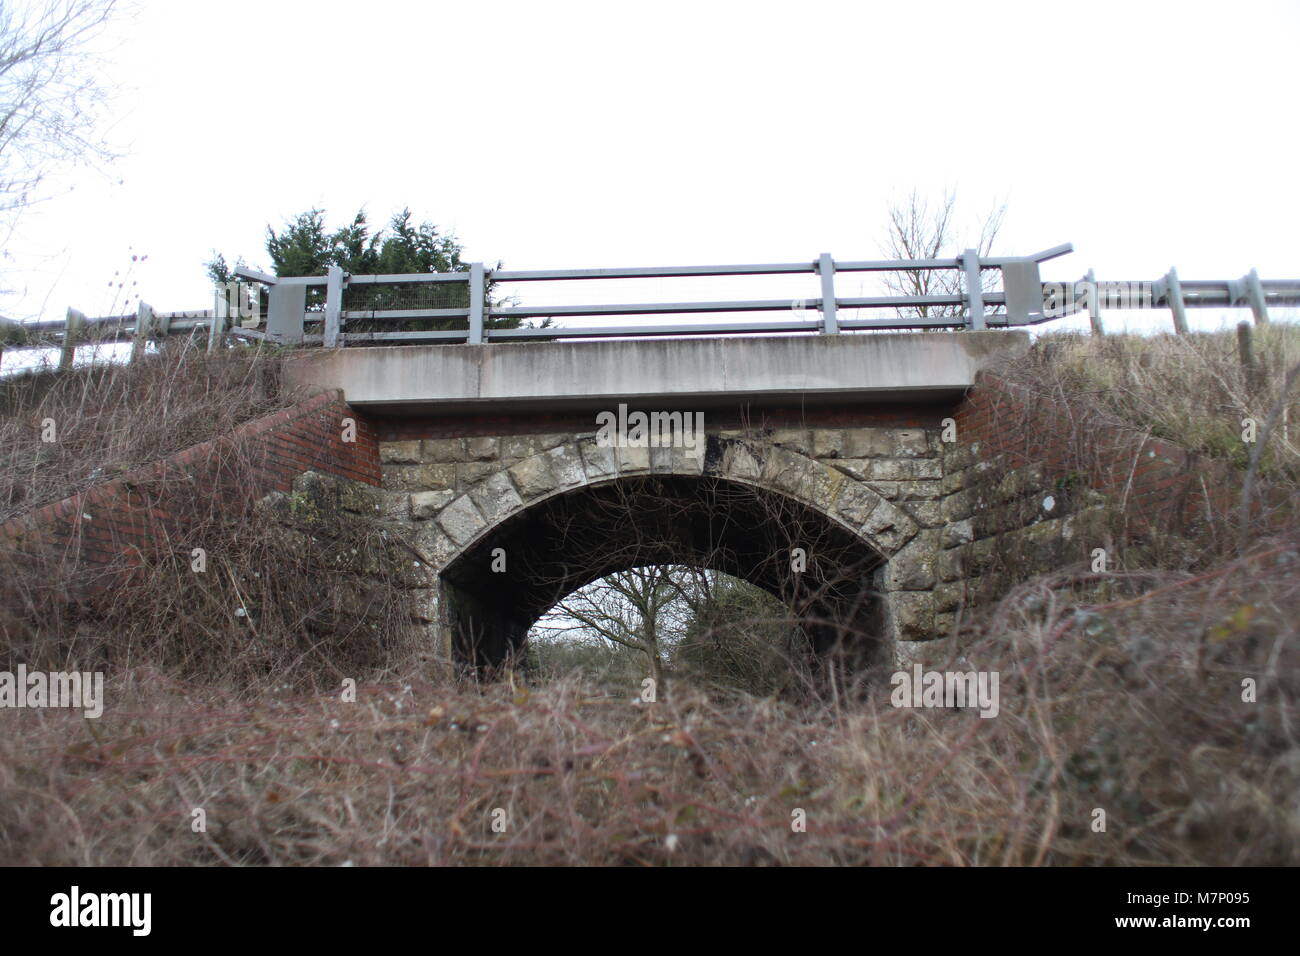 Old Henstridge railway bridge, trains on the Somerset and Dorset line would have travelled under to get to Henstridge station (where photographer is) Stock Photo